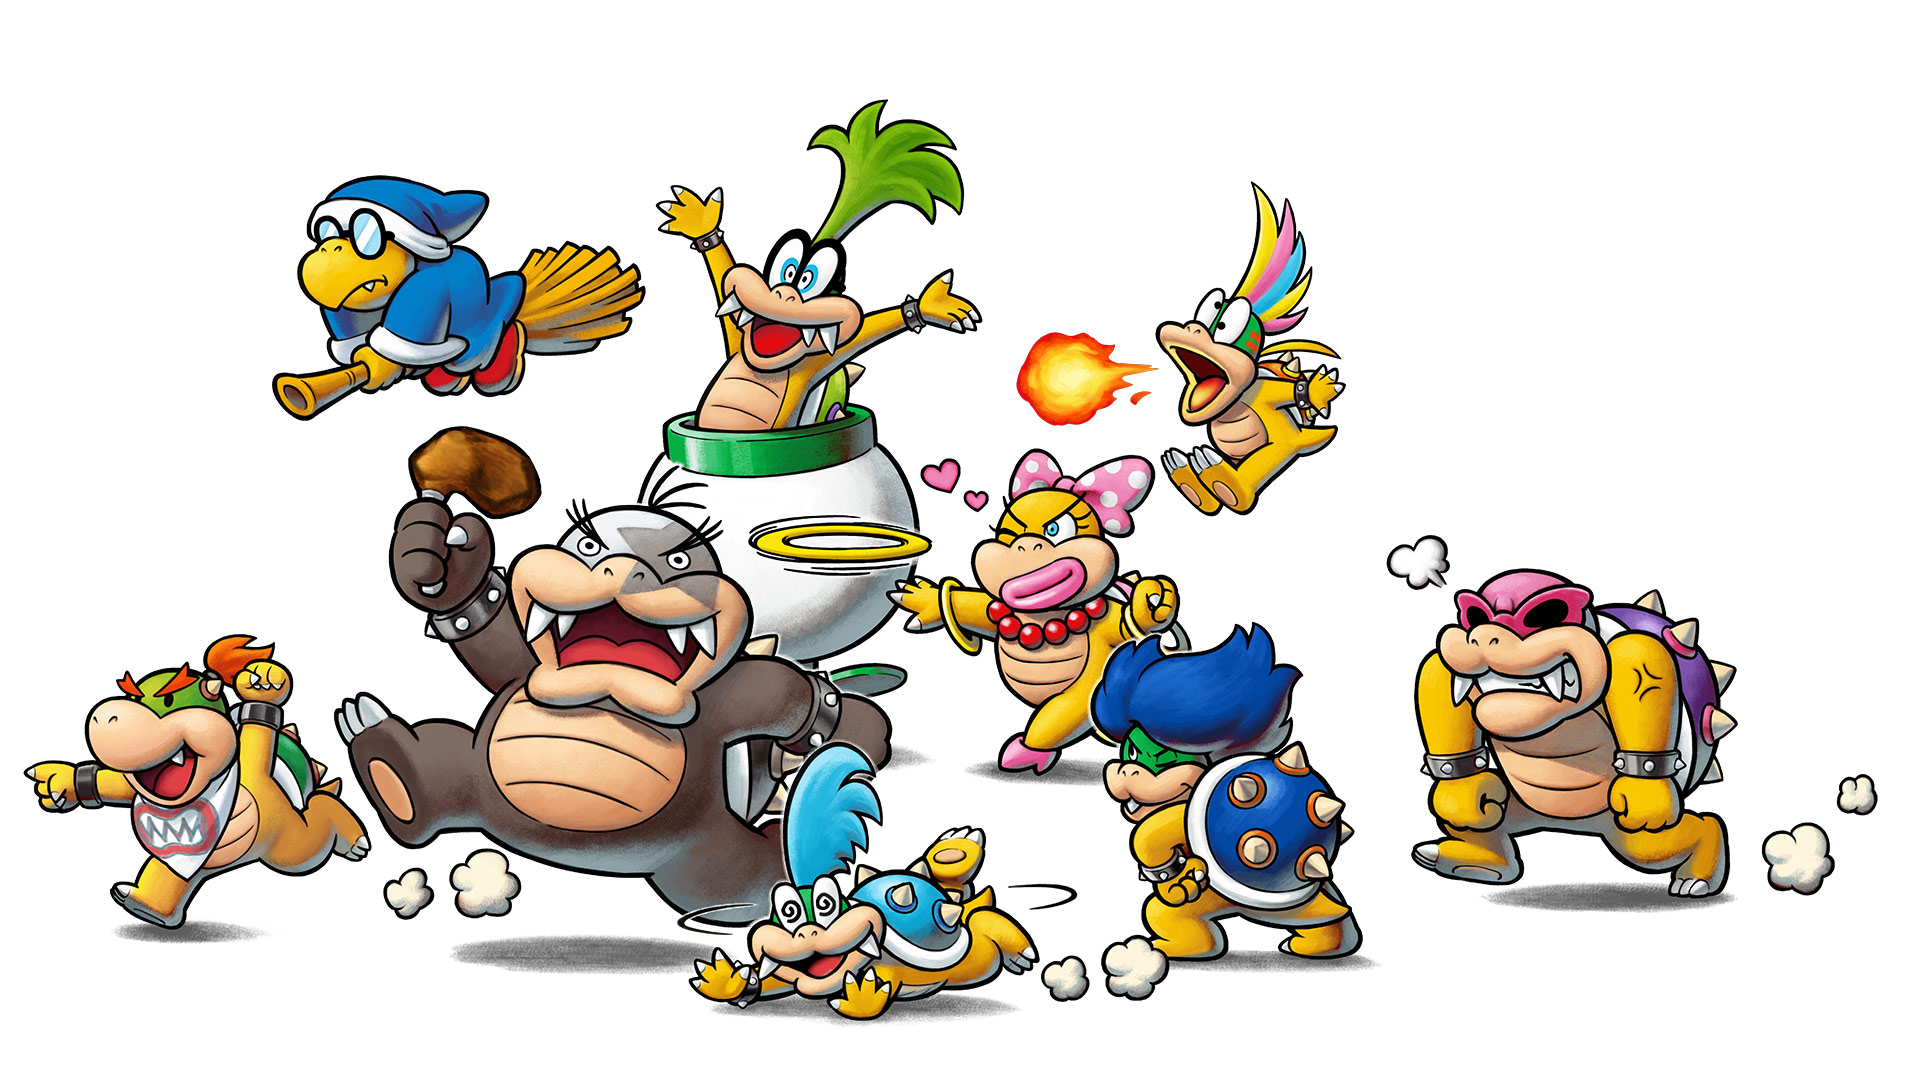 The Koopalings are a mess and I love them. (Image: Nintendo)